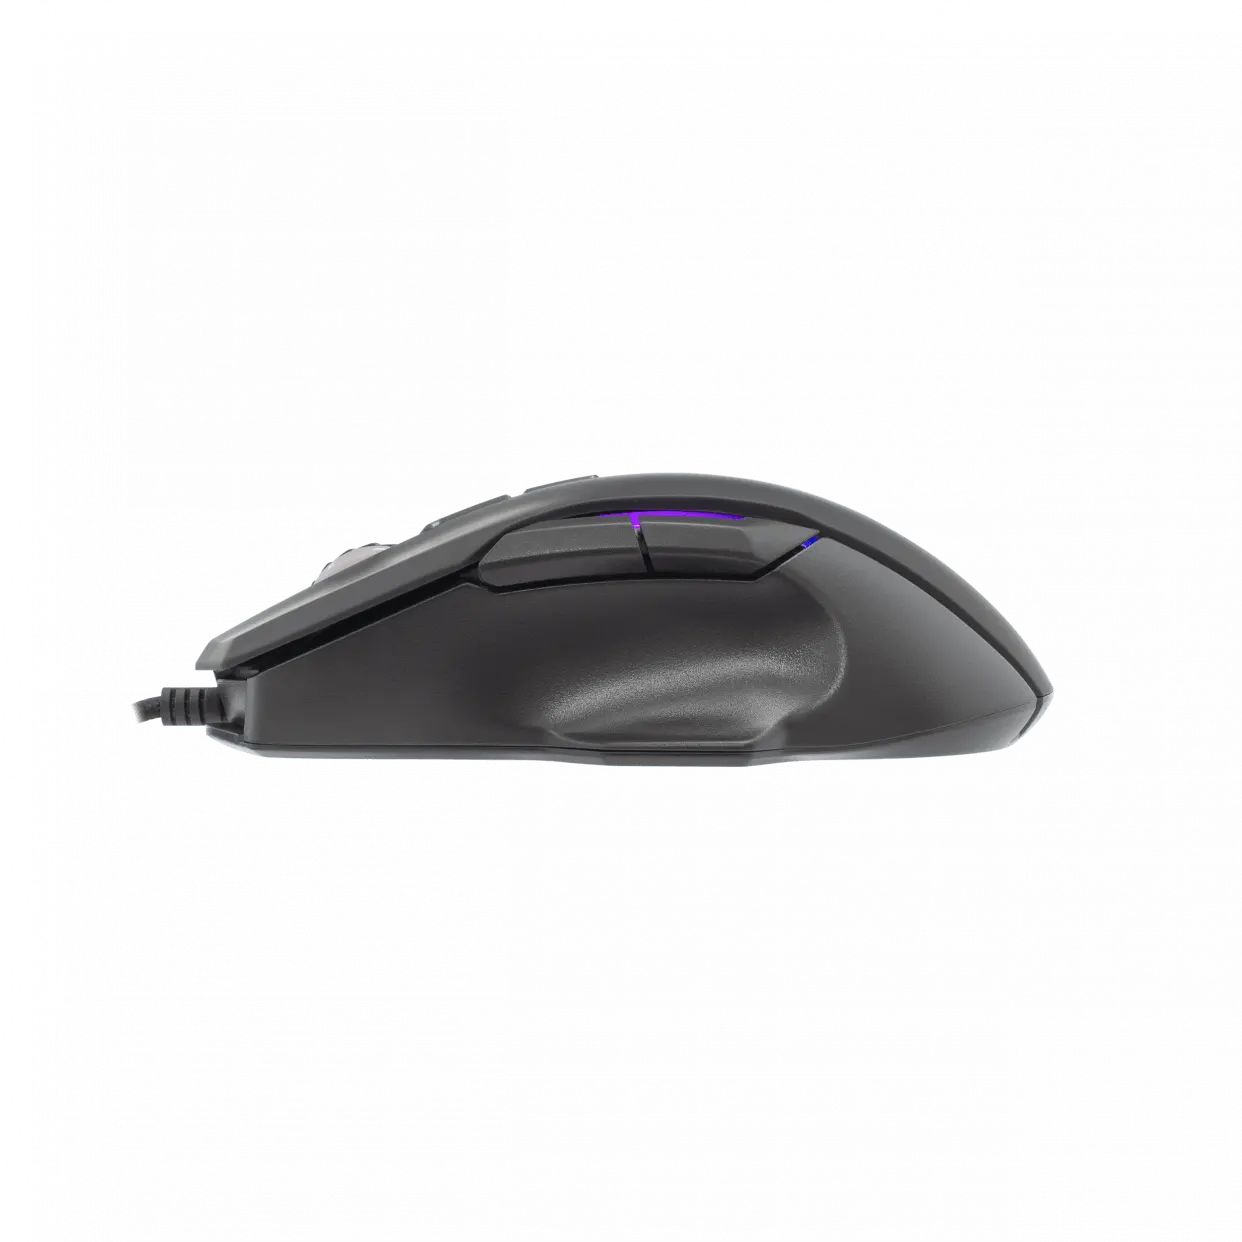 White Shark Gaming Mouse, Wired, 7200 DPI, RGB Lighting, Black, MORHOLT-MO287